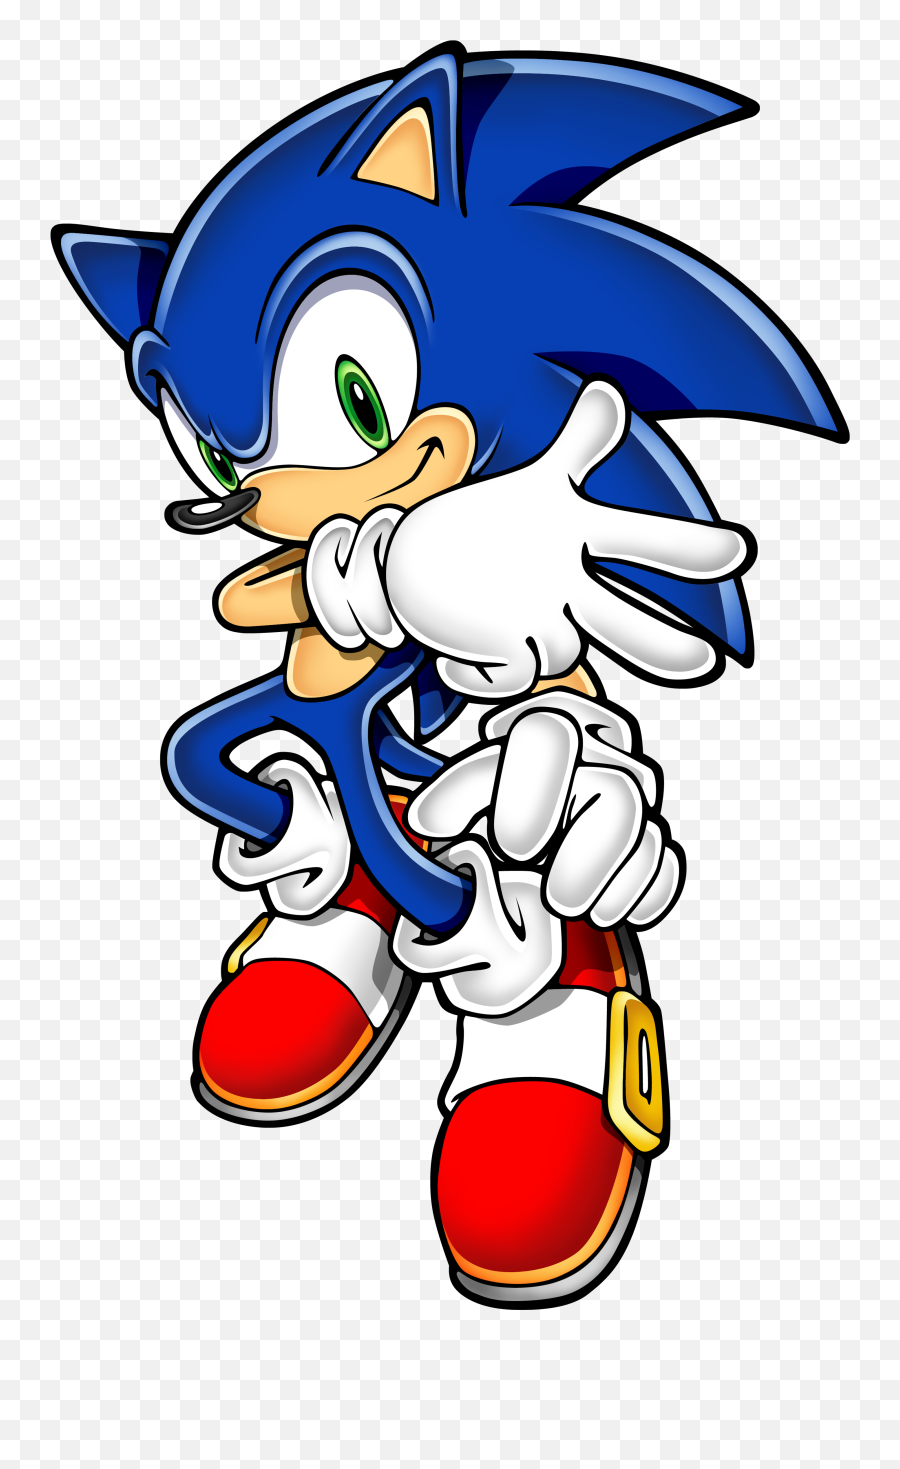 Video Game Characters You Love Page 3 Skullheart - Sonic Advance 3 Sonic Emoji,Steam B3 Emoticon